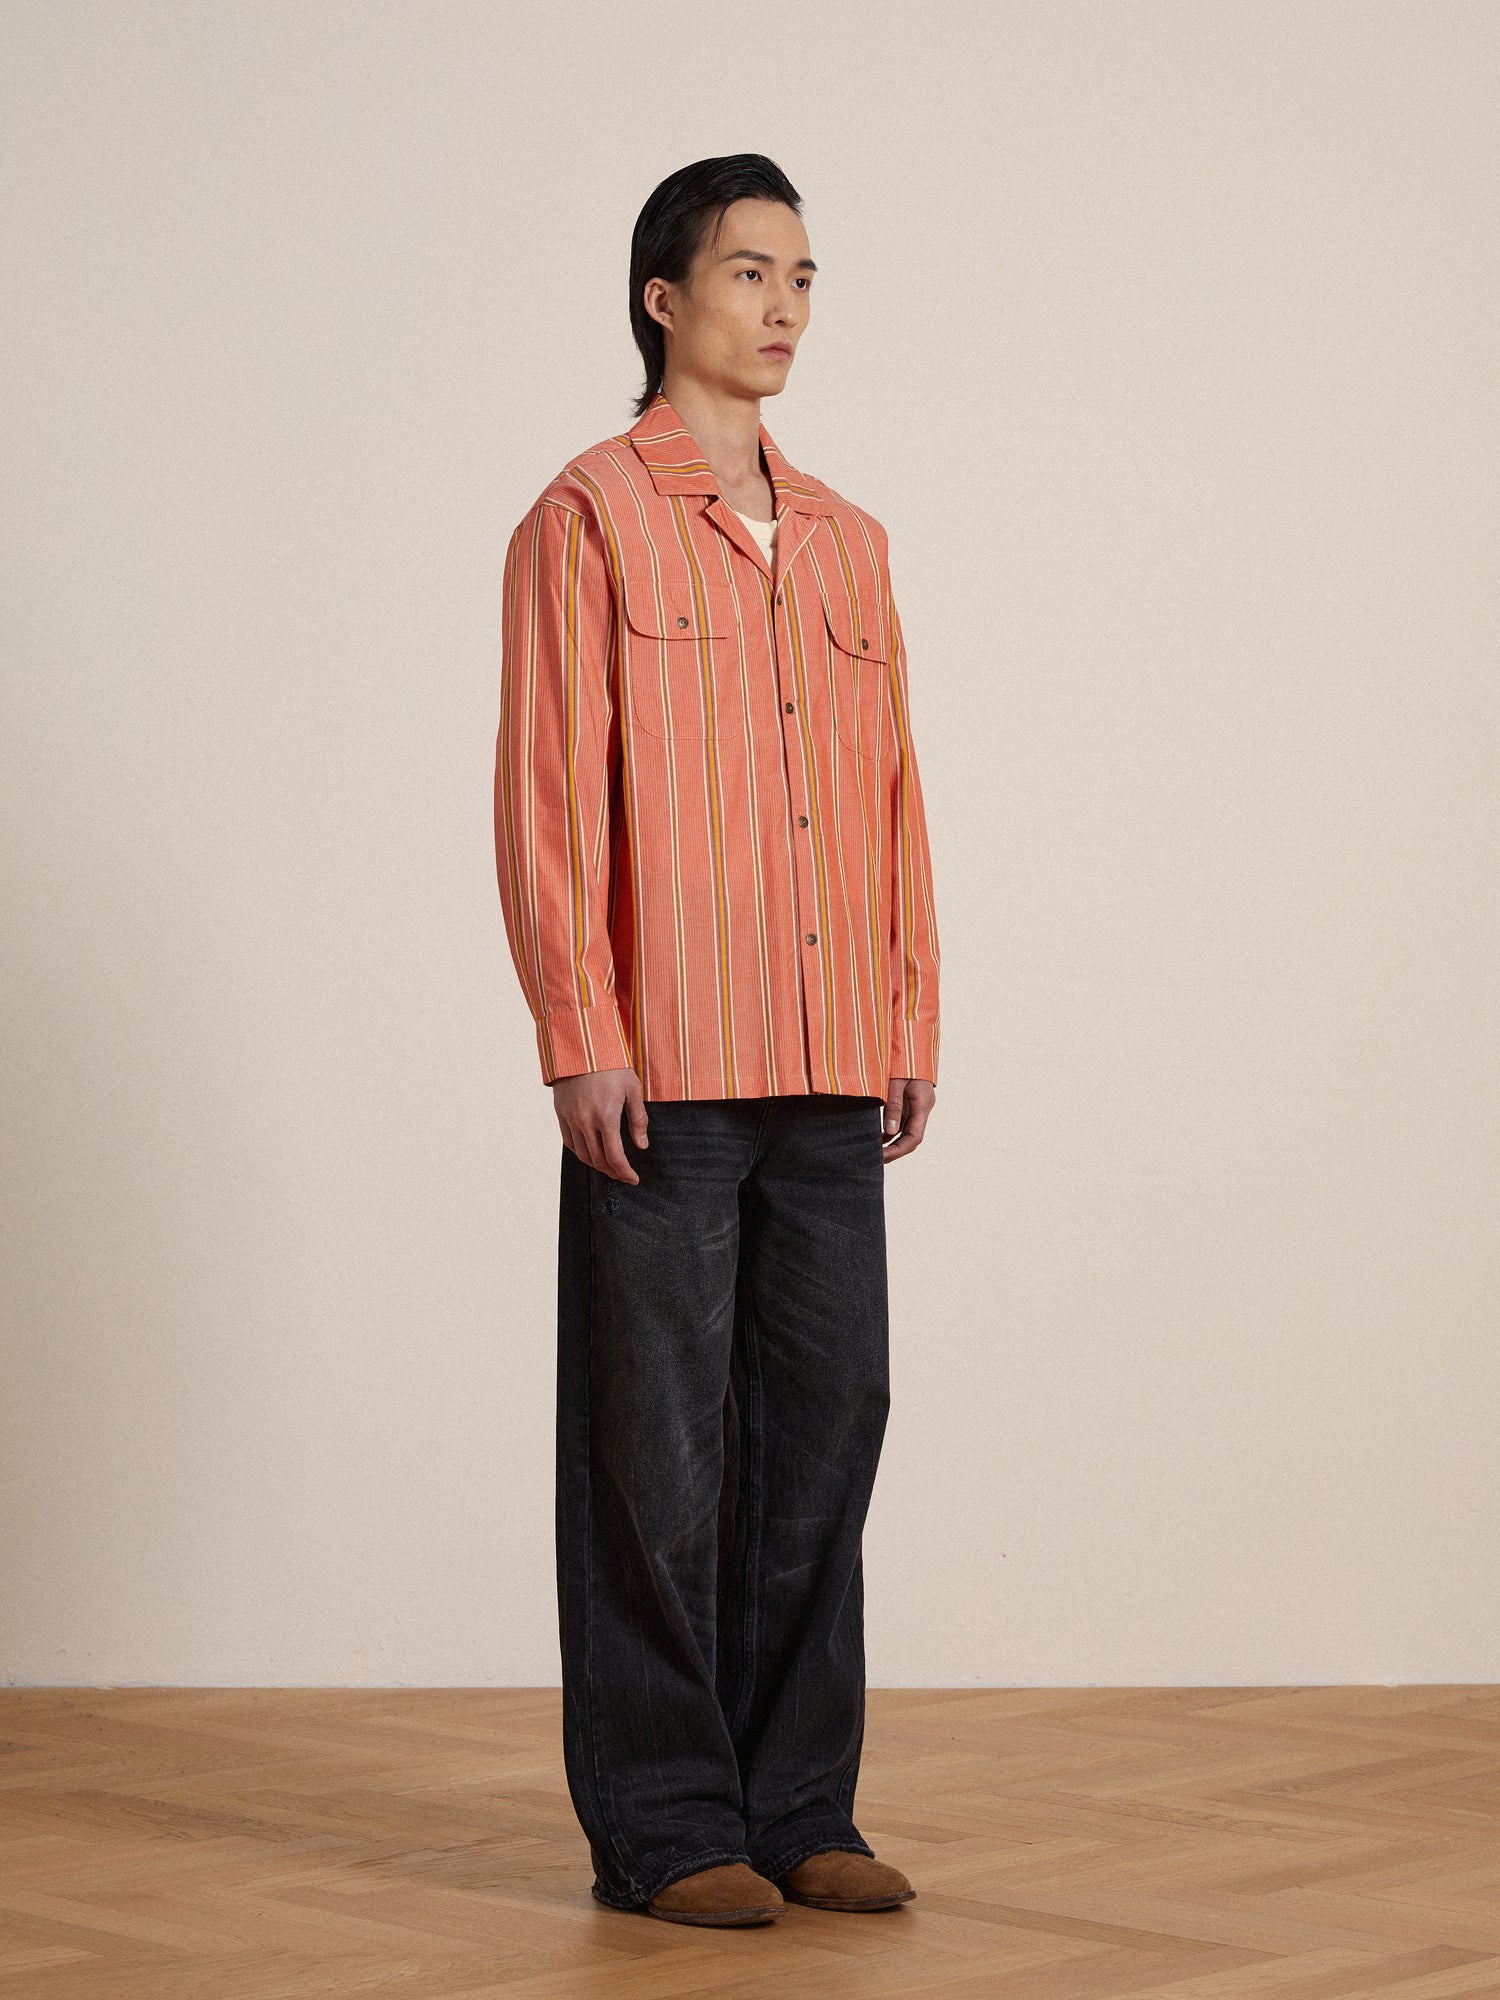 A man in an orange Found Stripe Citrus LS Camp Shirt standing on a wooden floor, exuding classic appeal.